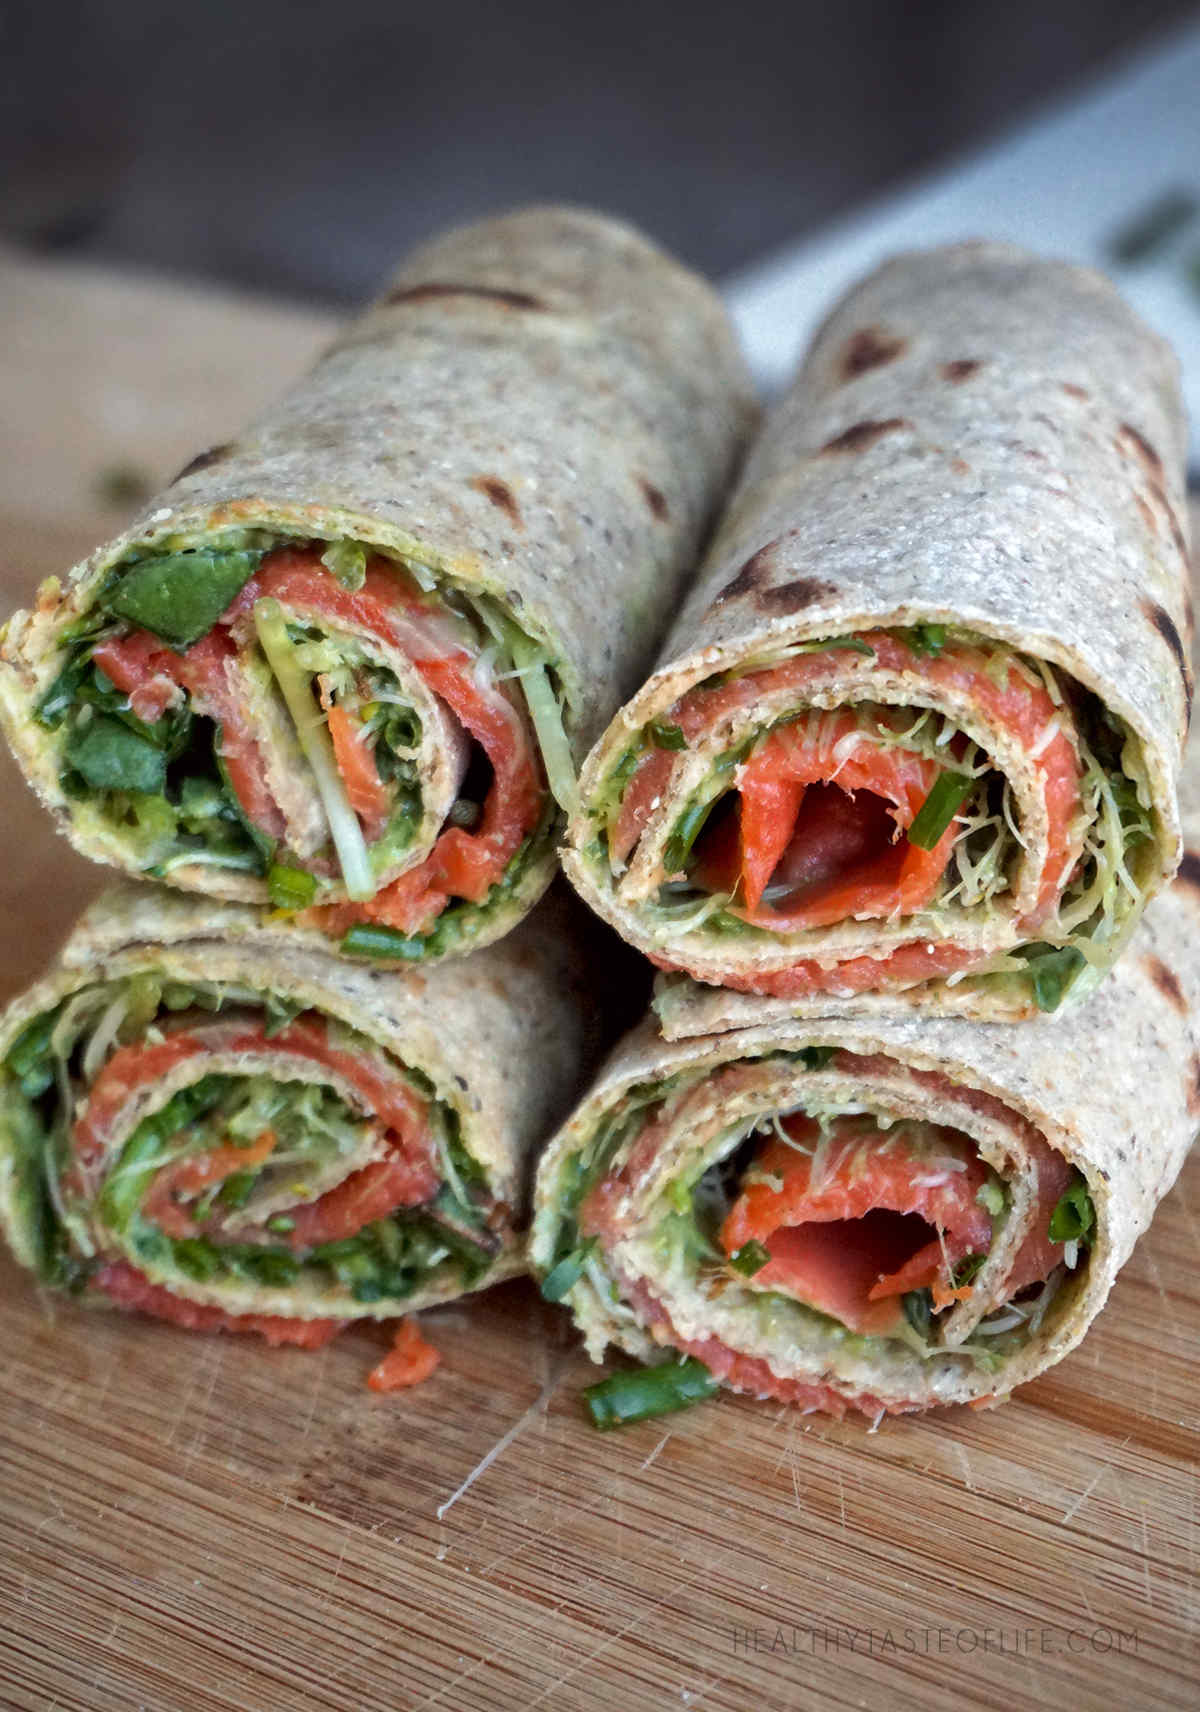 Savory smoked salmon, leafy greens and avocado sauce, wrapped in a gluten free tortilla. Enjoy as breakfast or brunch, at home or on the go.